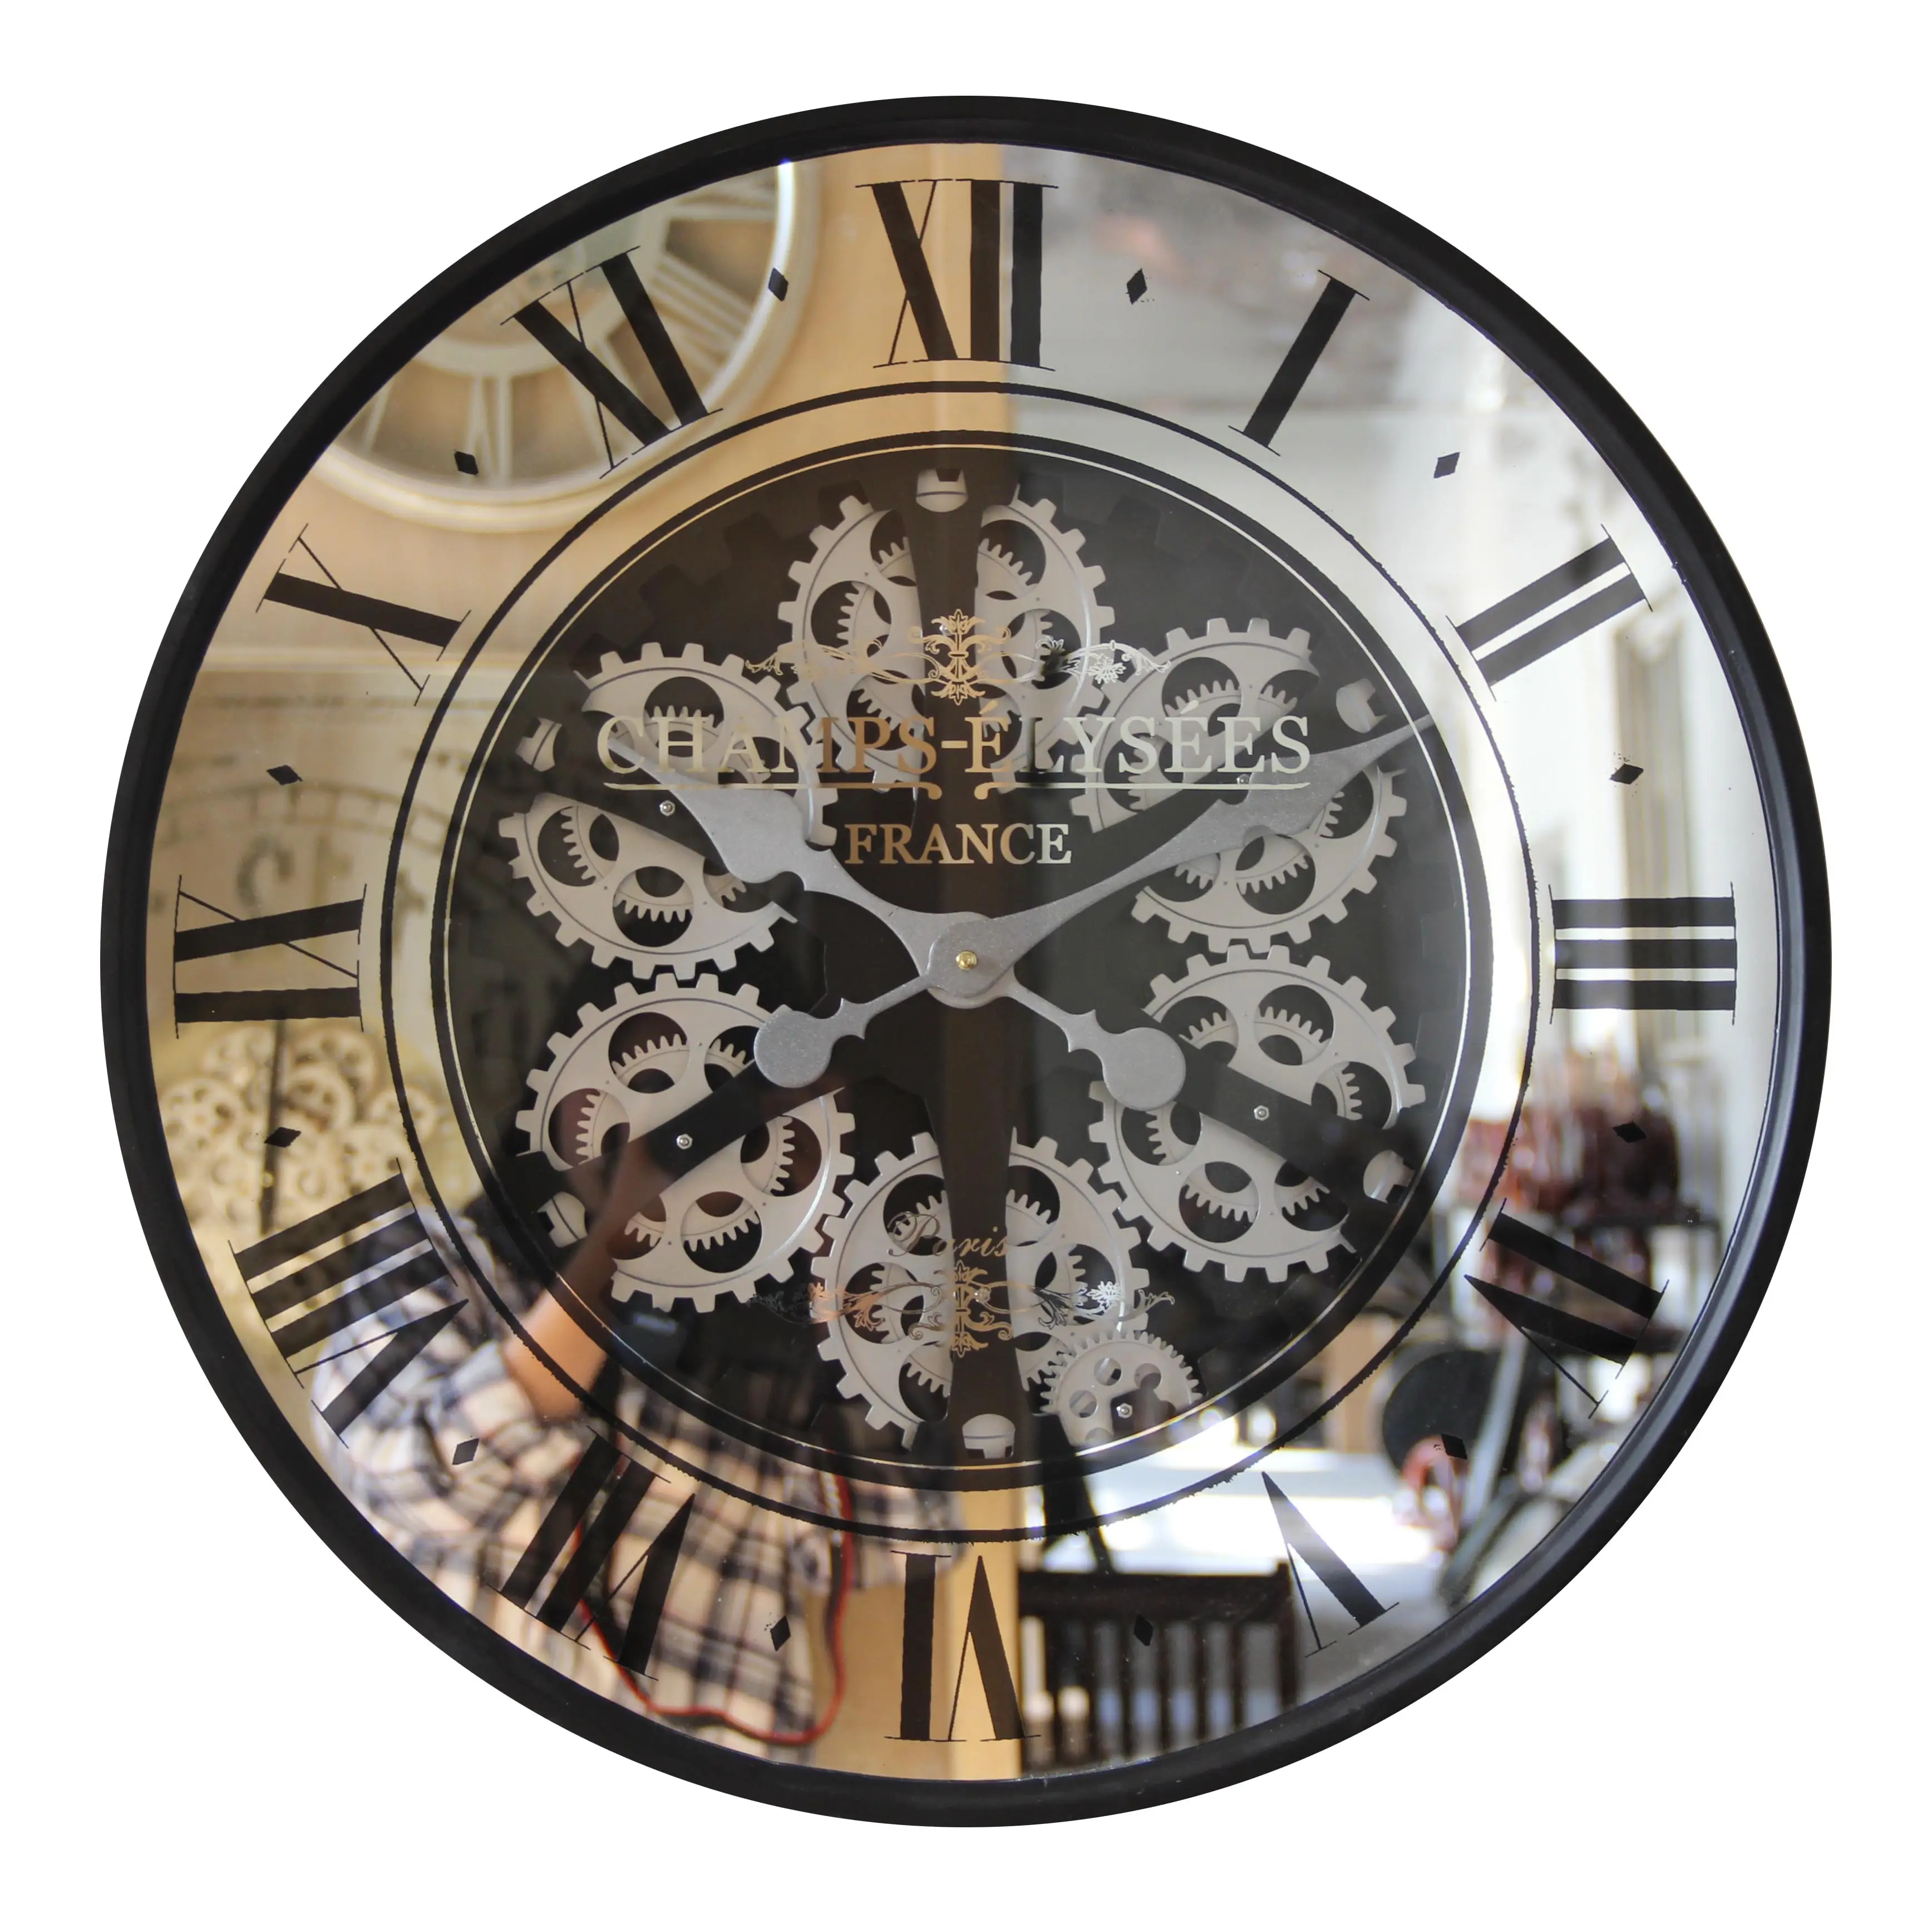 Stock 24 Inch Large Mirror Wall Clock Home Decorative Black Roman Number Gear Clock With Real Moving Gears